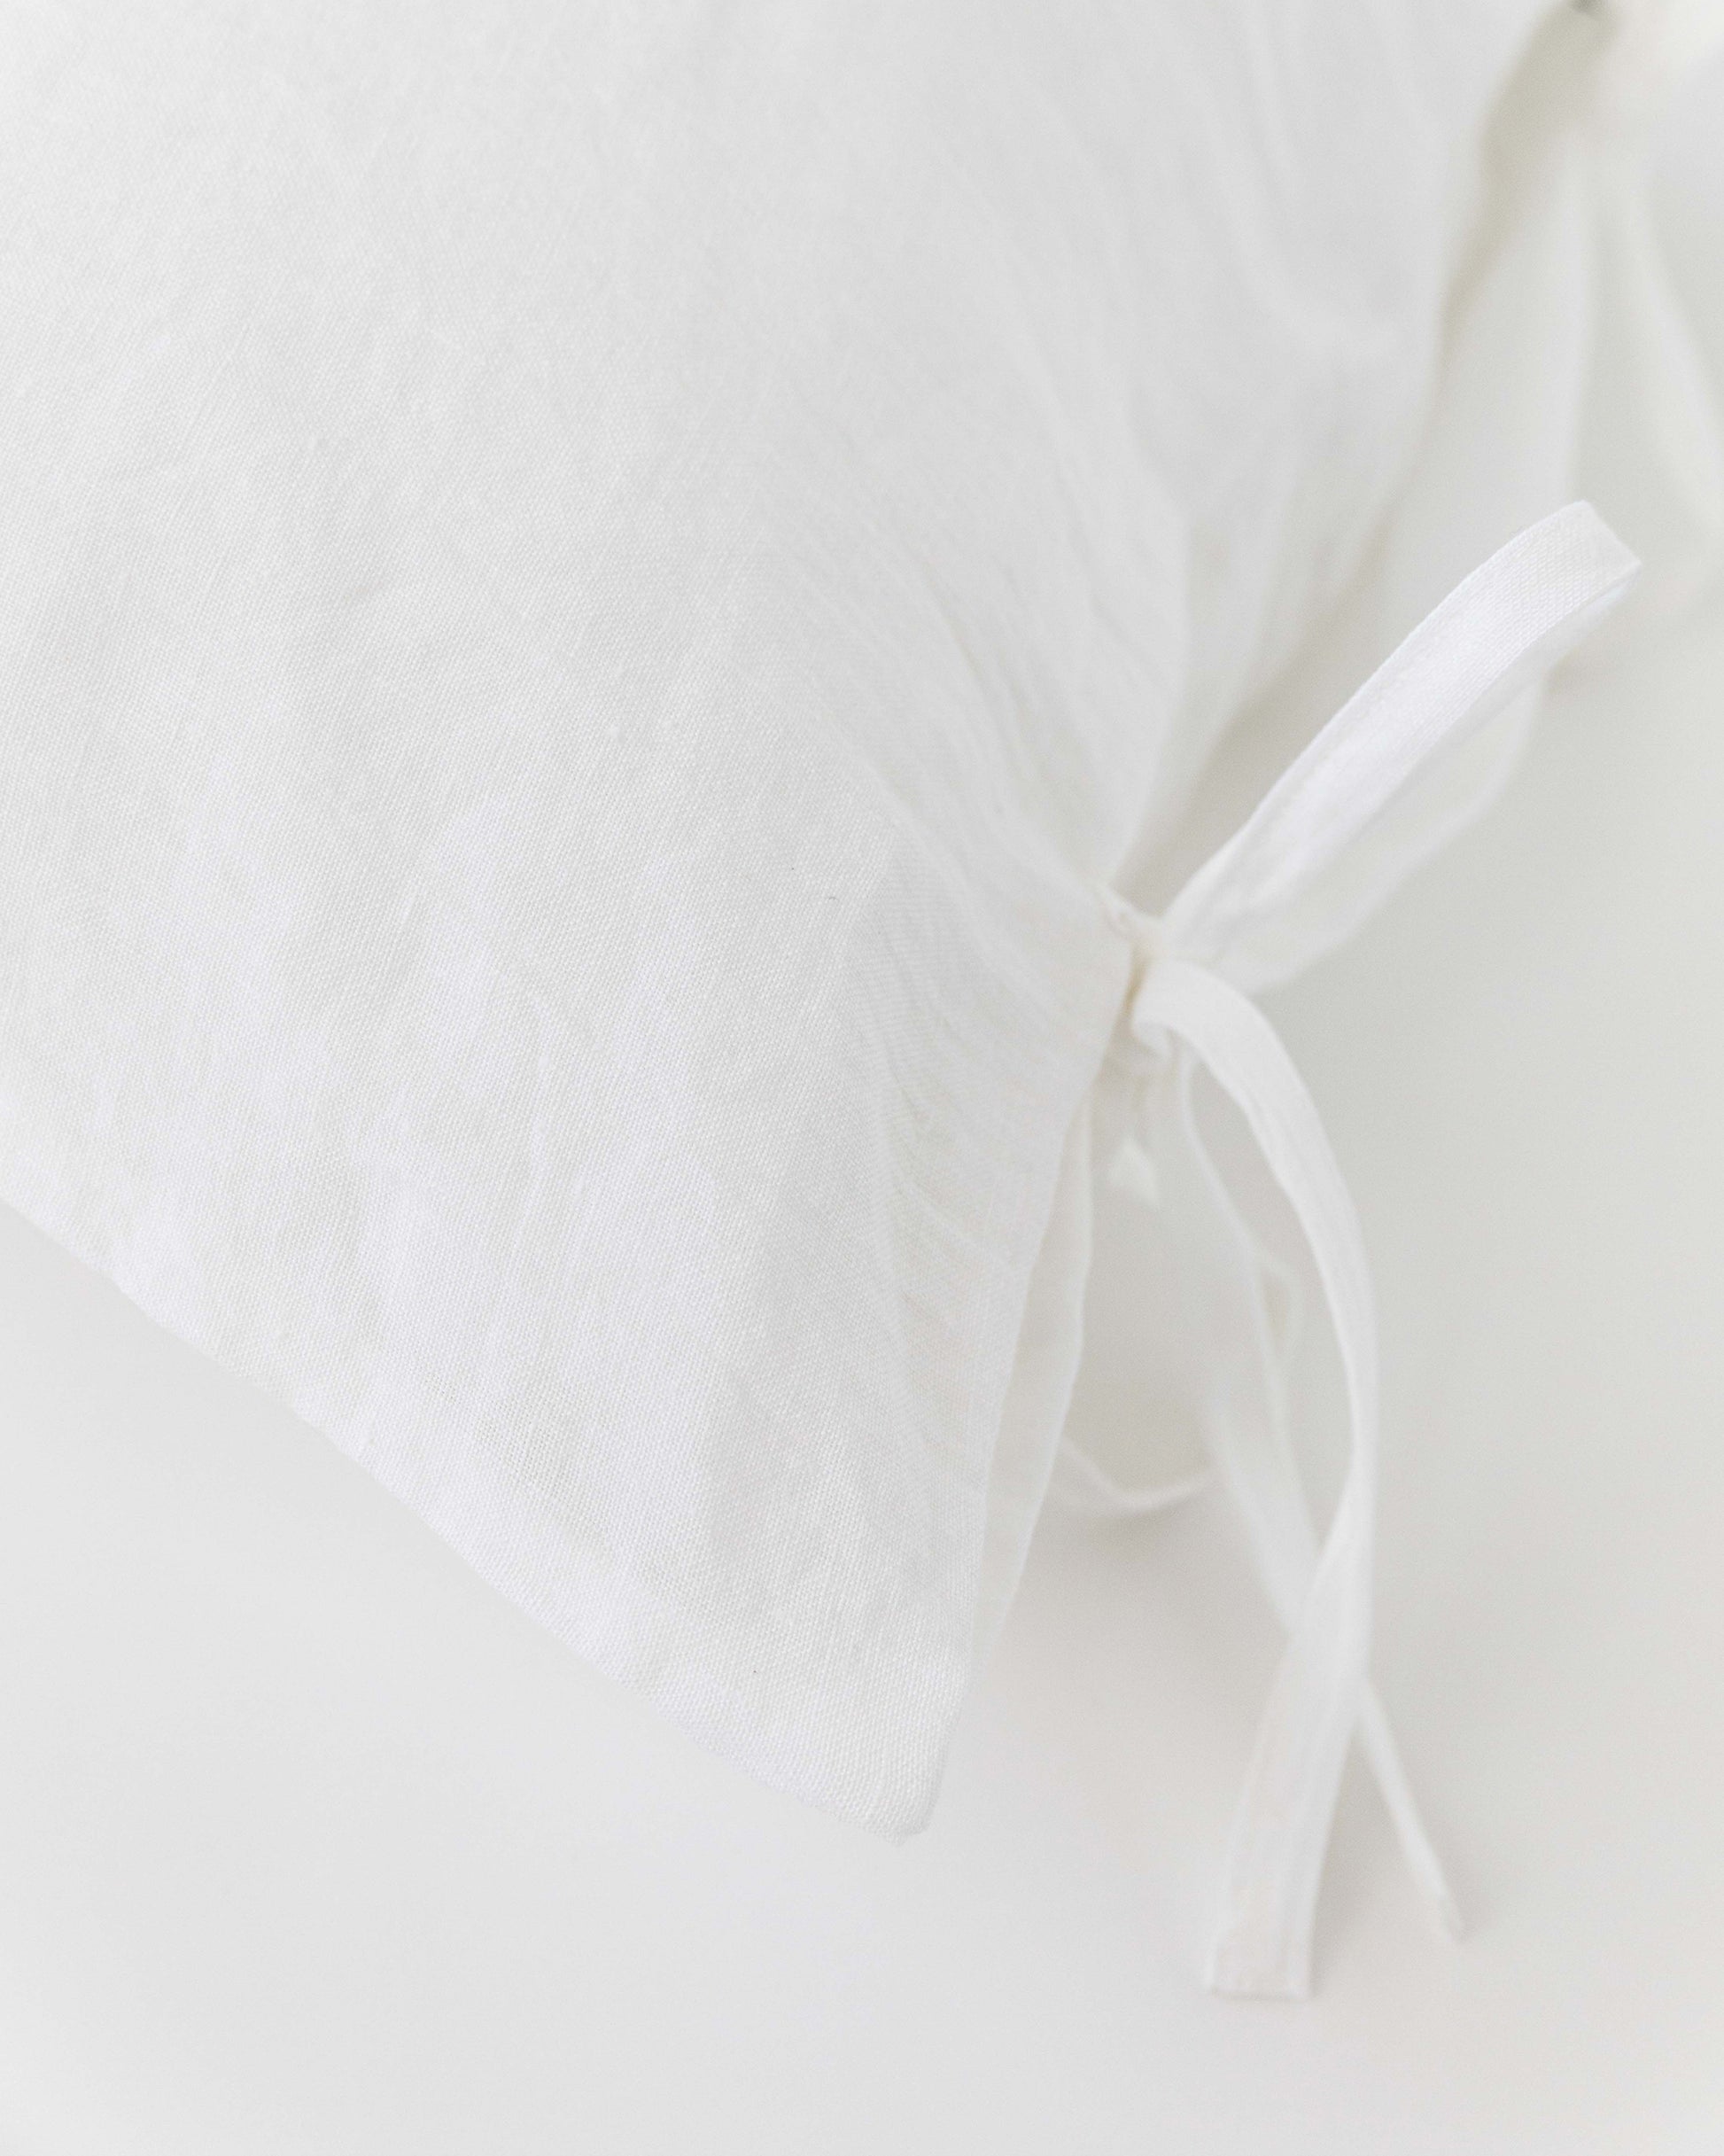 Linen pillowcase with ties in White - MagicLinen